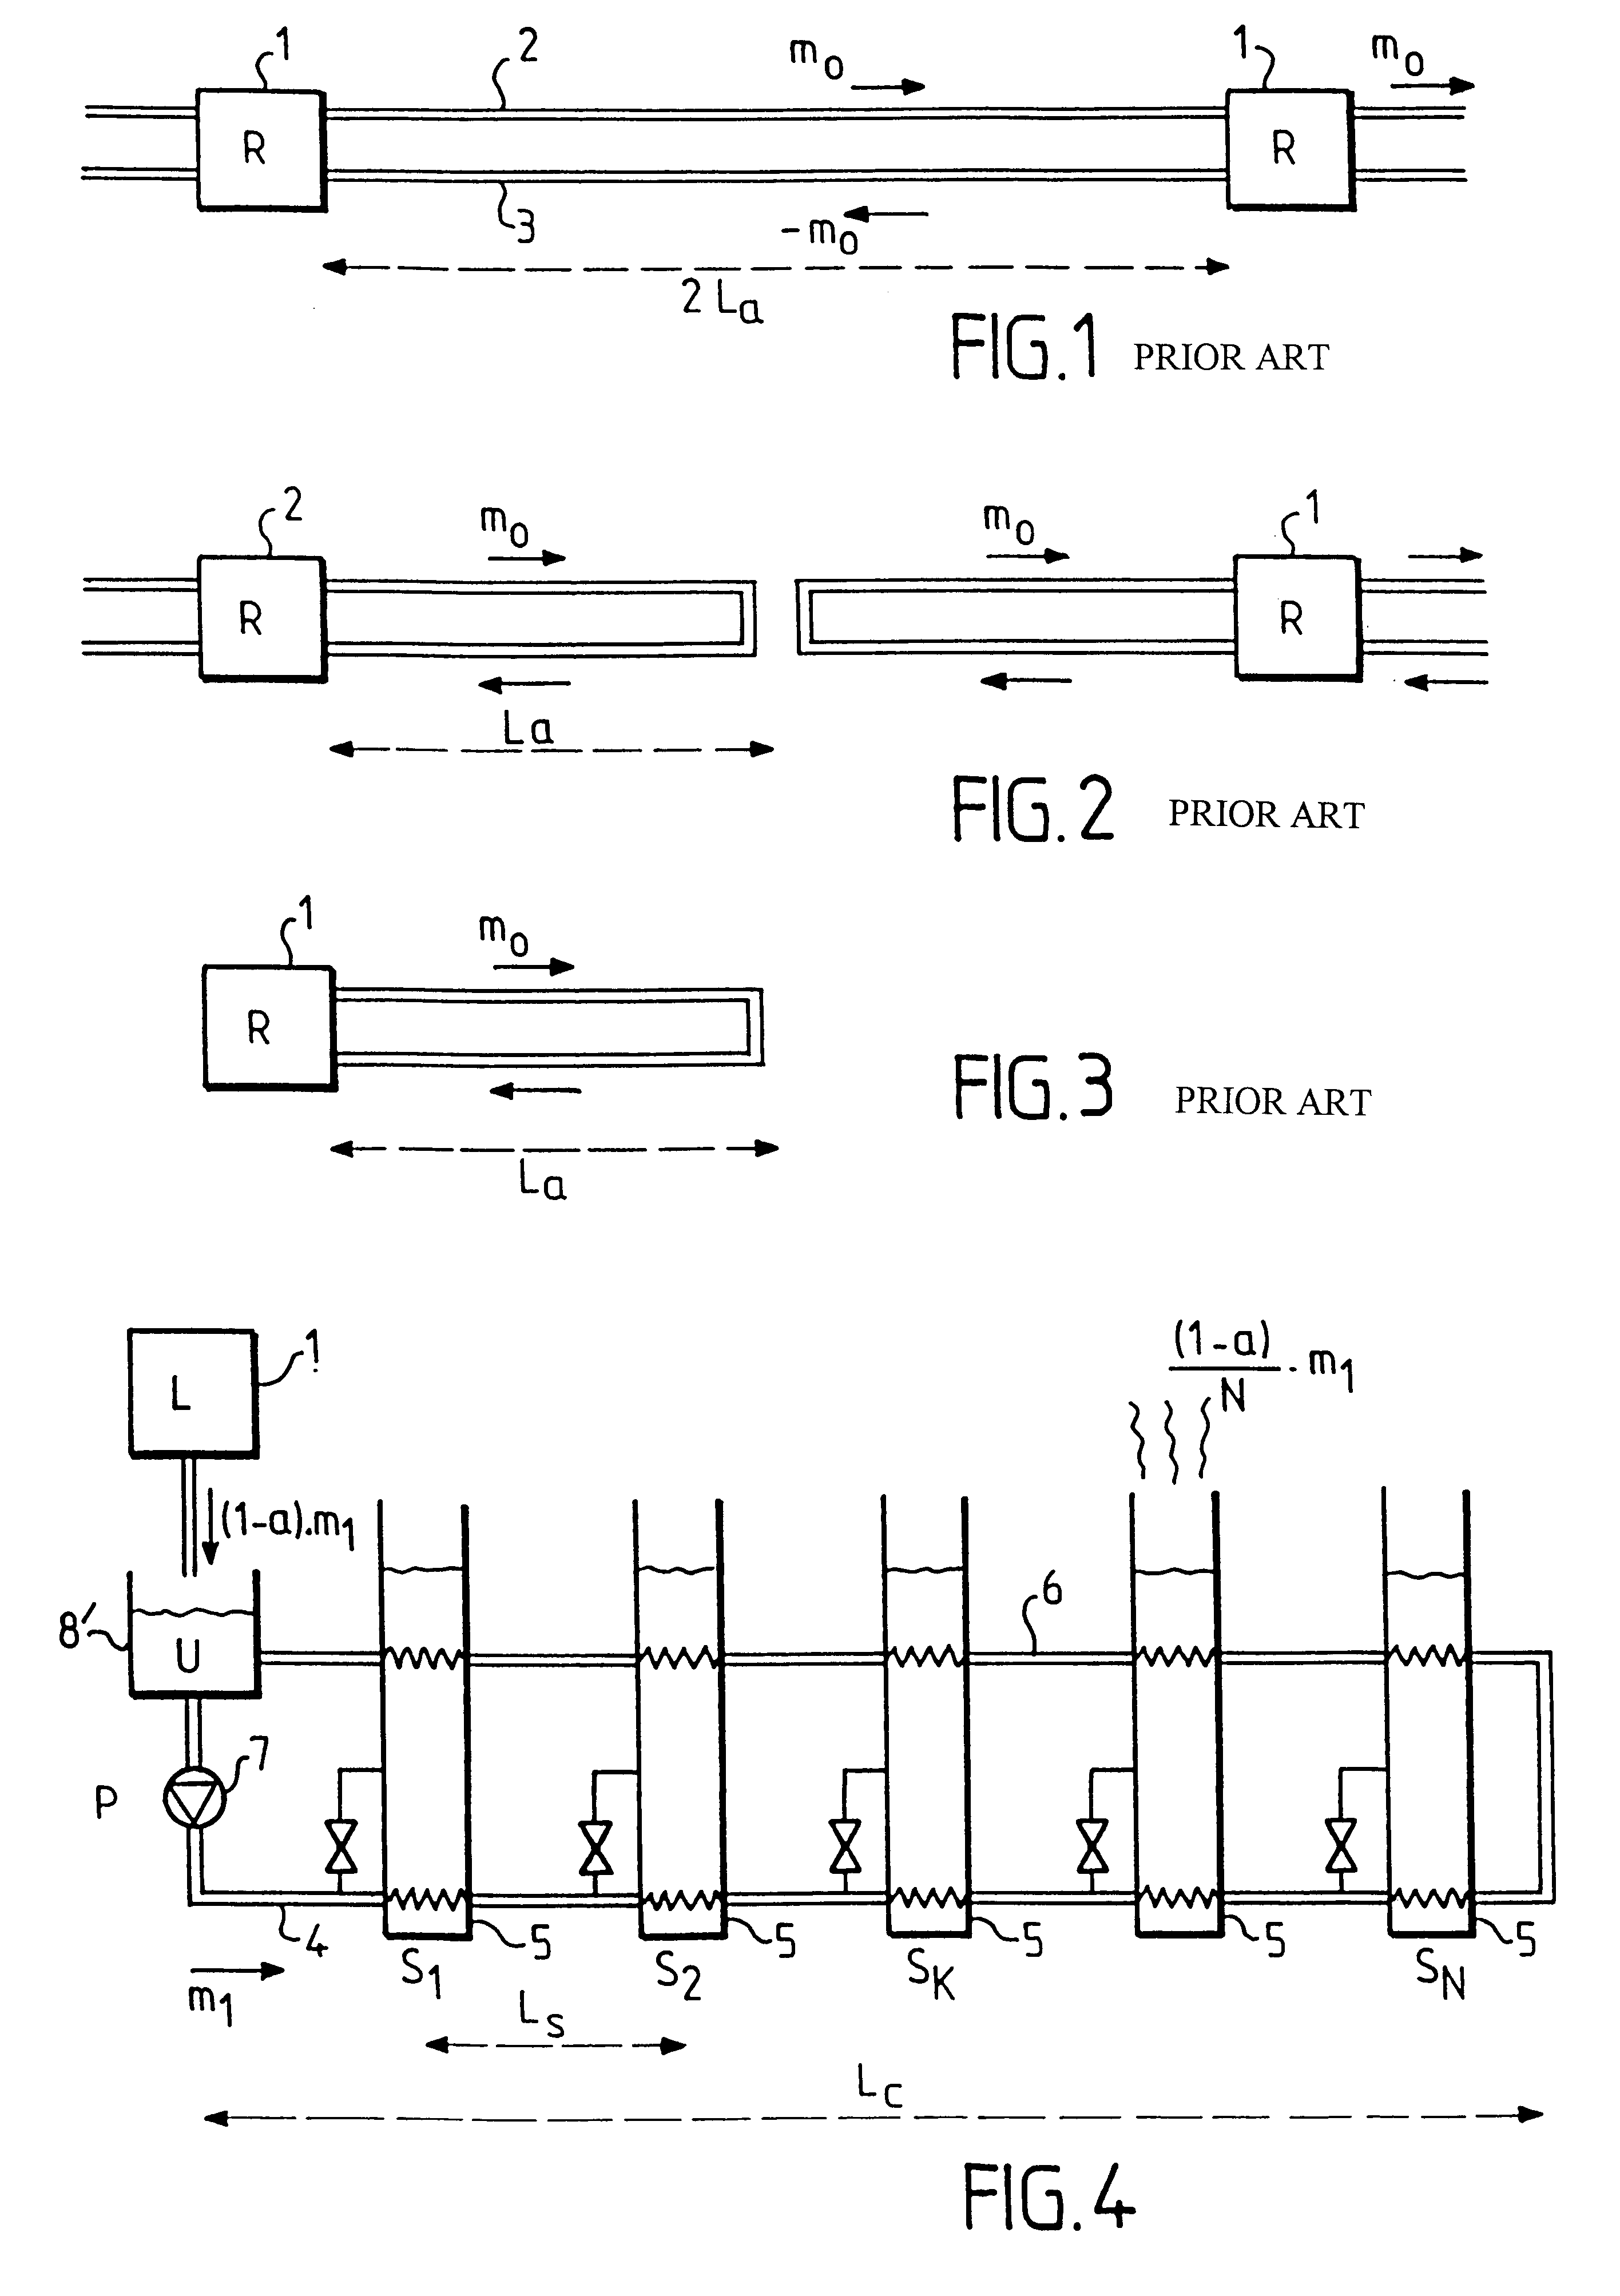 Method of maintaining a superconducting cryolink at low temperature